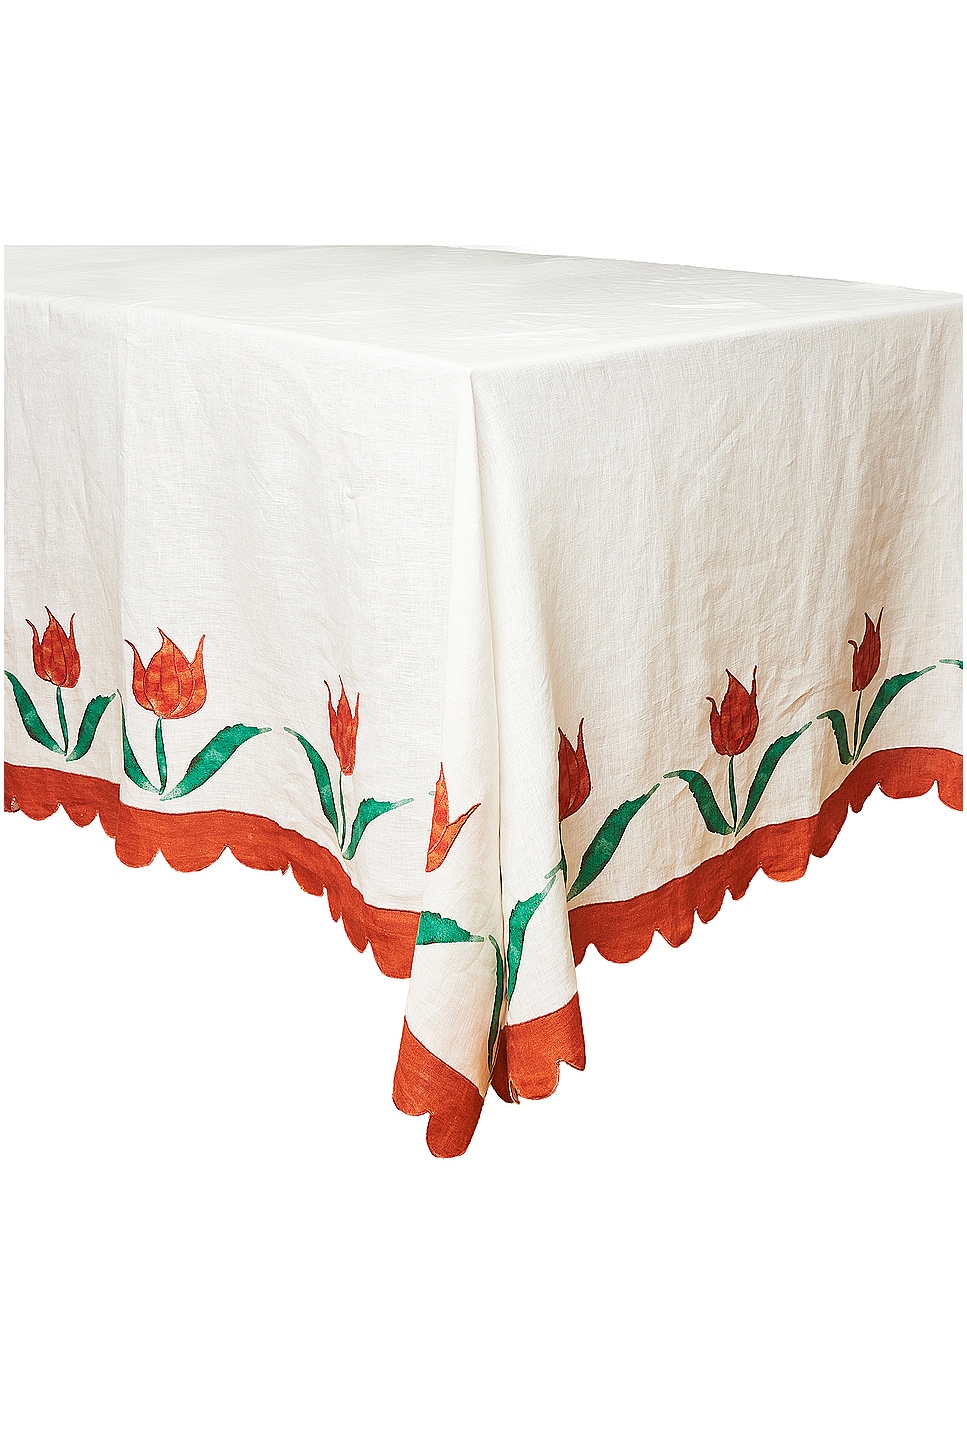 Image 1 of Misette Linen Embroidered Tablecloth in Jardin